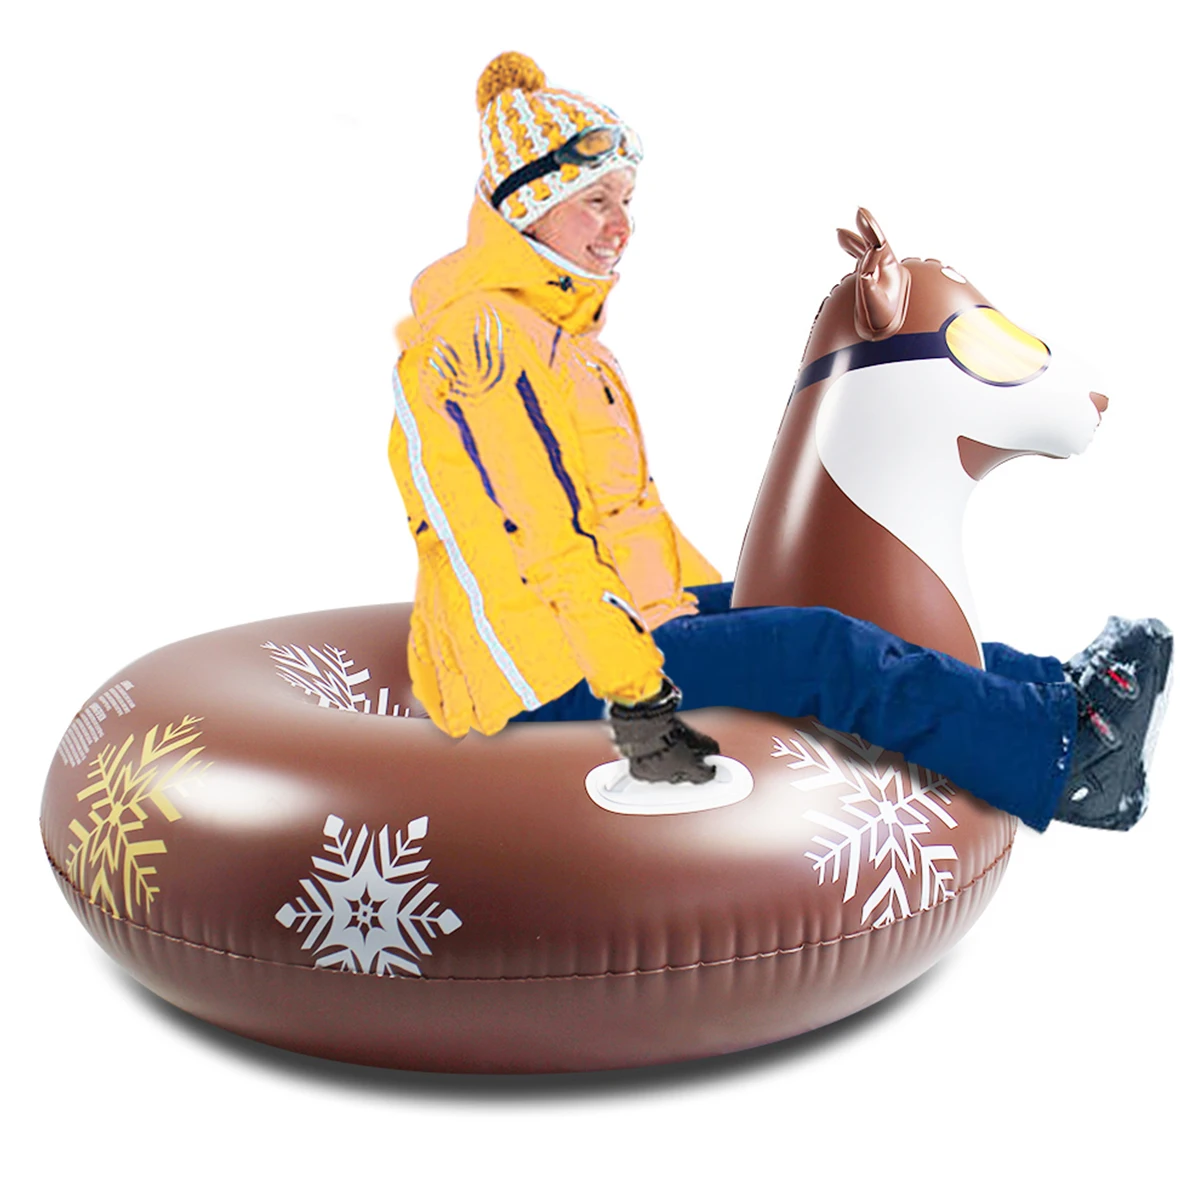 

PVC Husky Winter Multi-function Snow Tube Inflatable Sled Summer Pool Float with Grip Handles for Adults 117x87cm